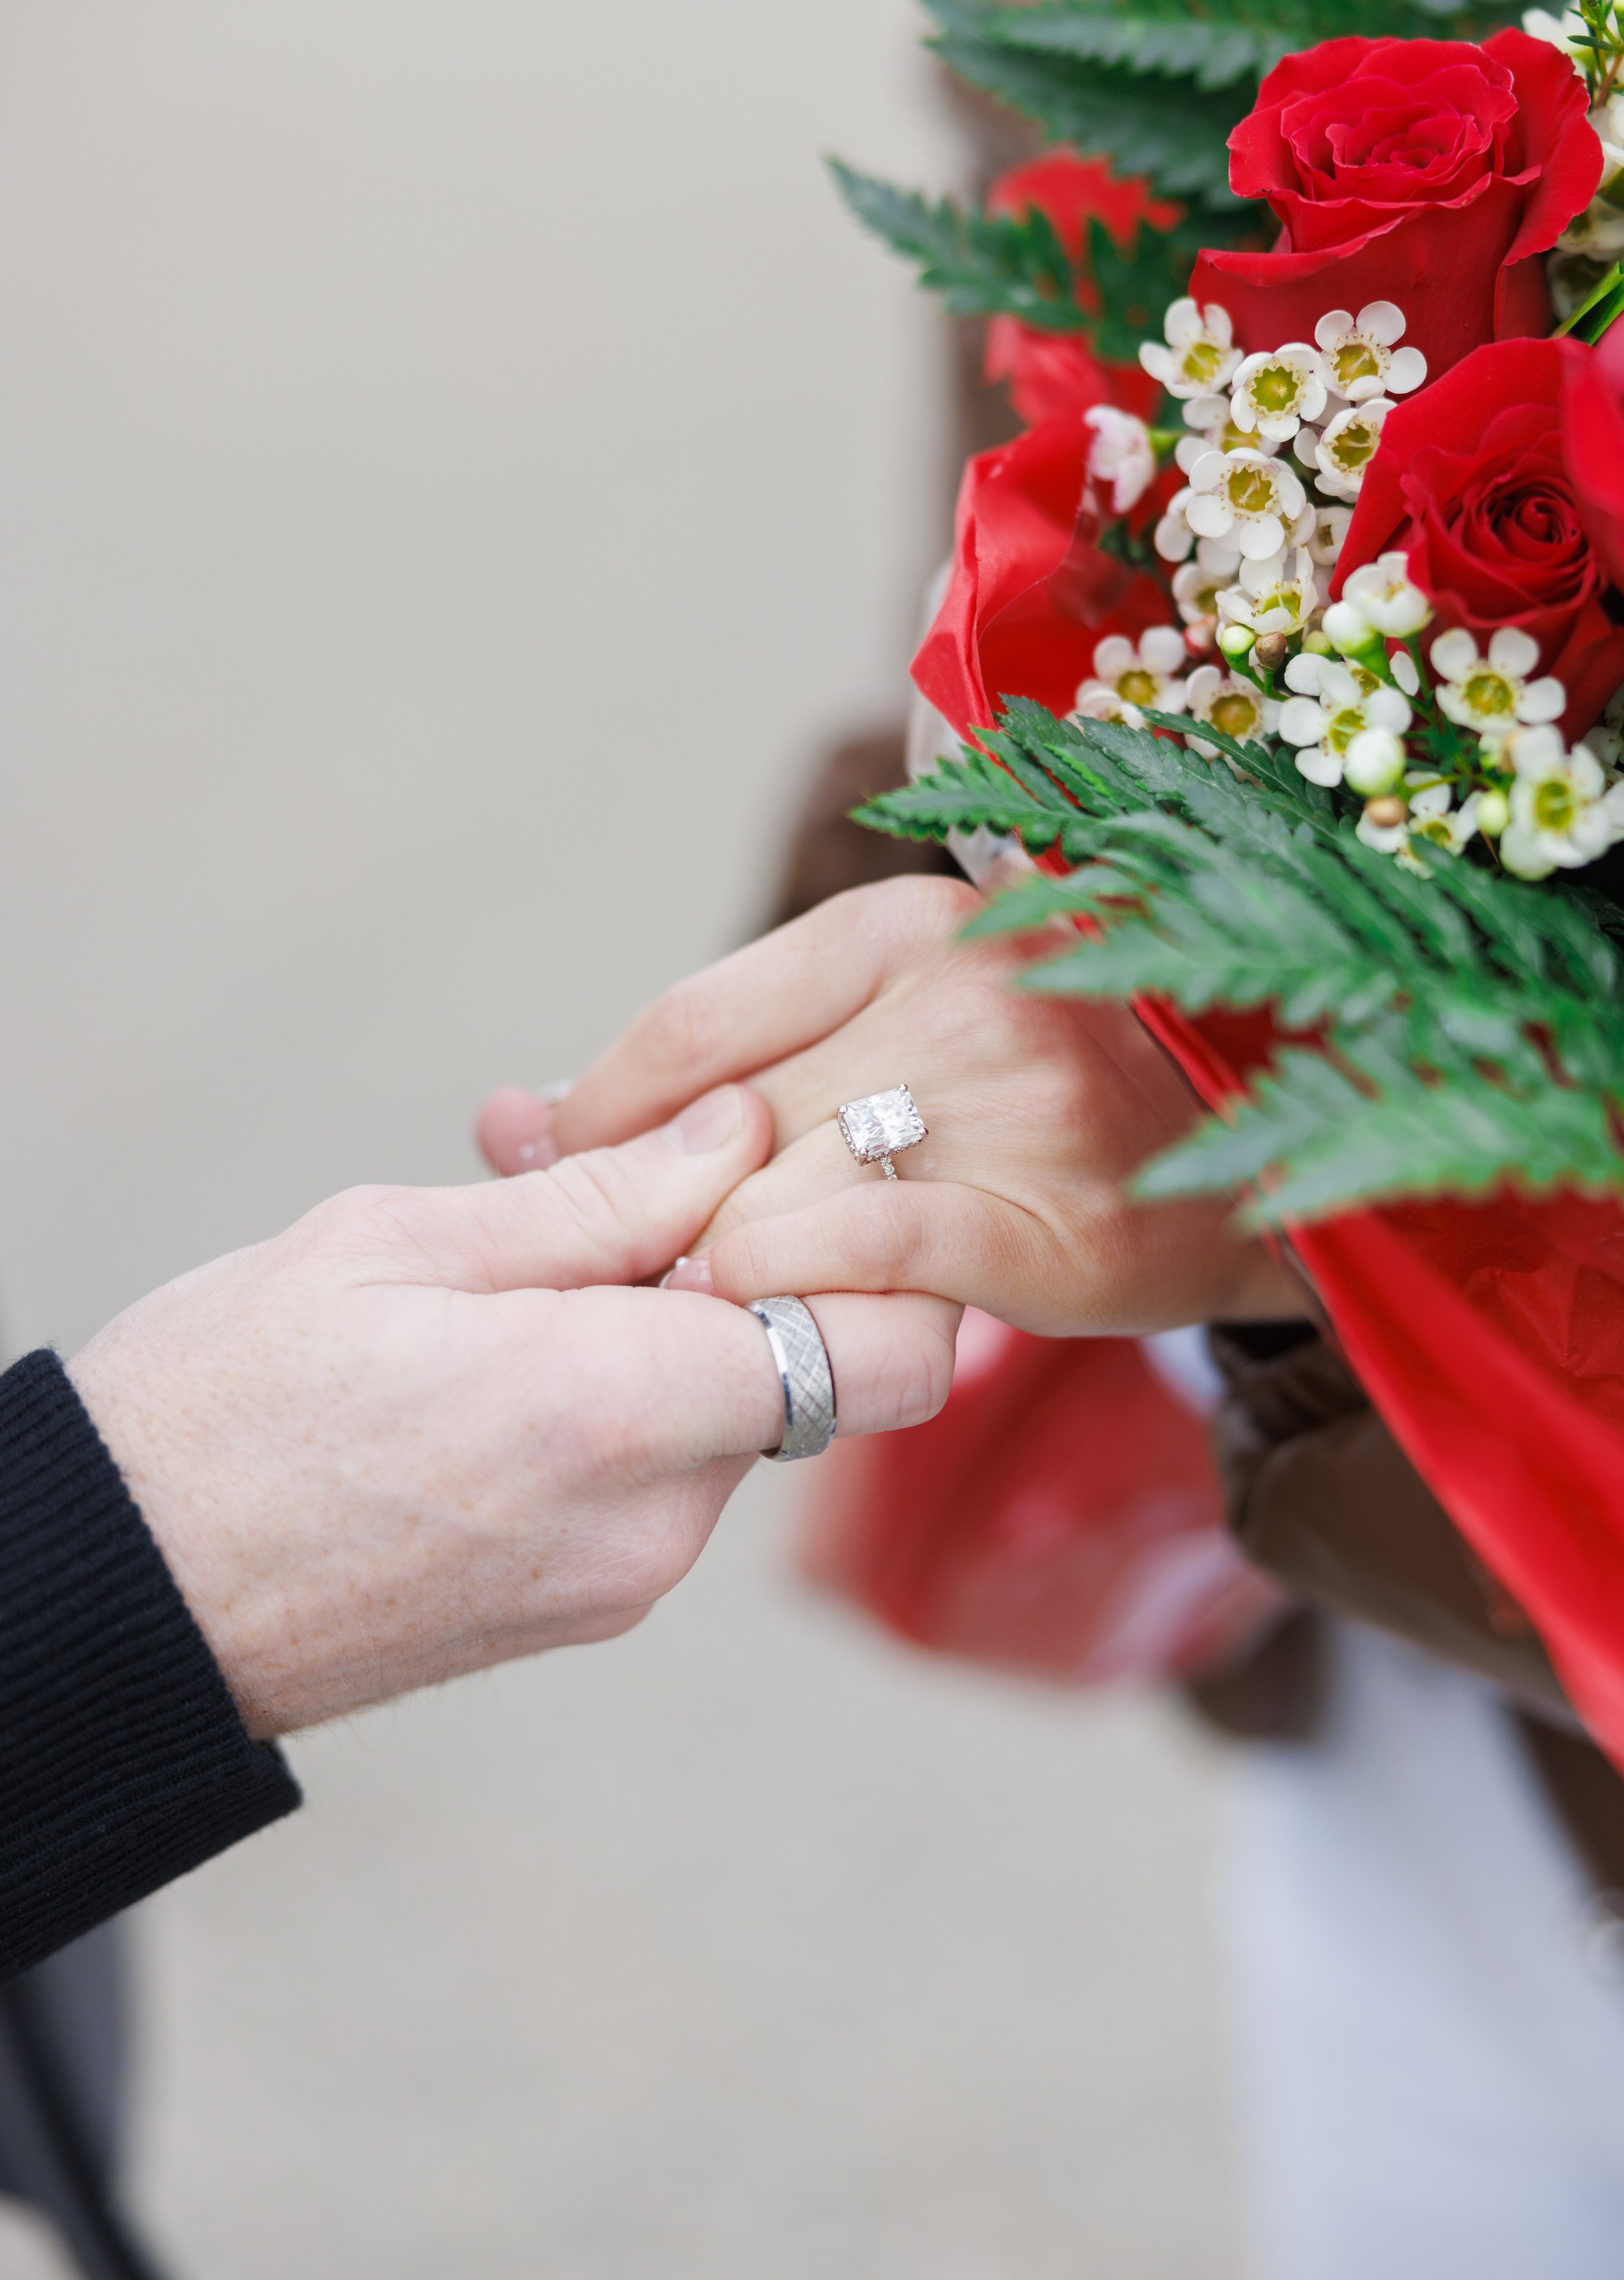  A close-up of the engagement ring being put on a woman's finger during a proposal by Savanna Richardson Photography. wedding ring ideas red rose bouquets for proposal #SavannaRichardsonPhotography #SavannaRichardsonEngagements #utahproposals #helico